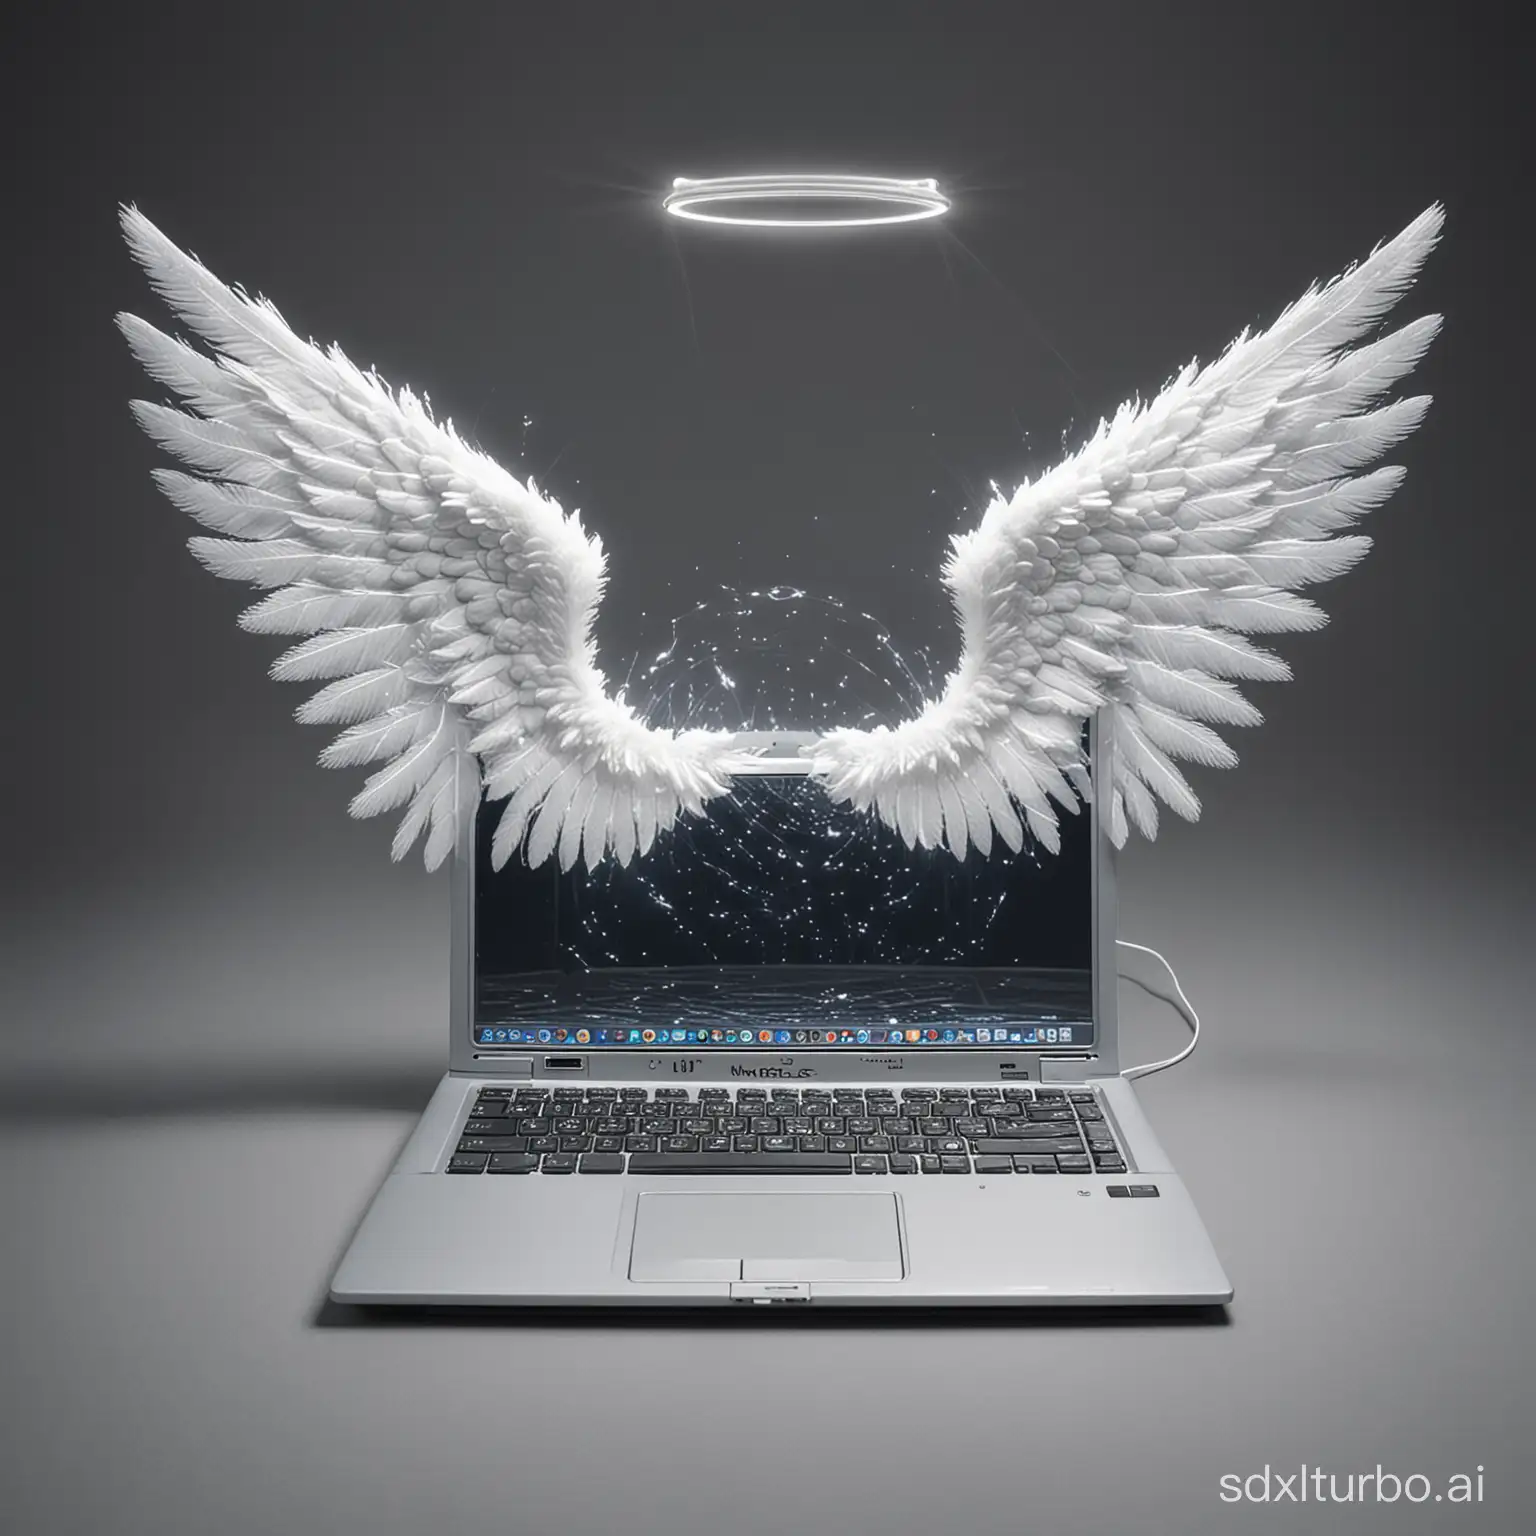 A COMPUTER WITH ANGEL WINGS